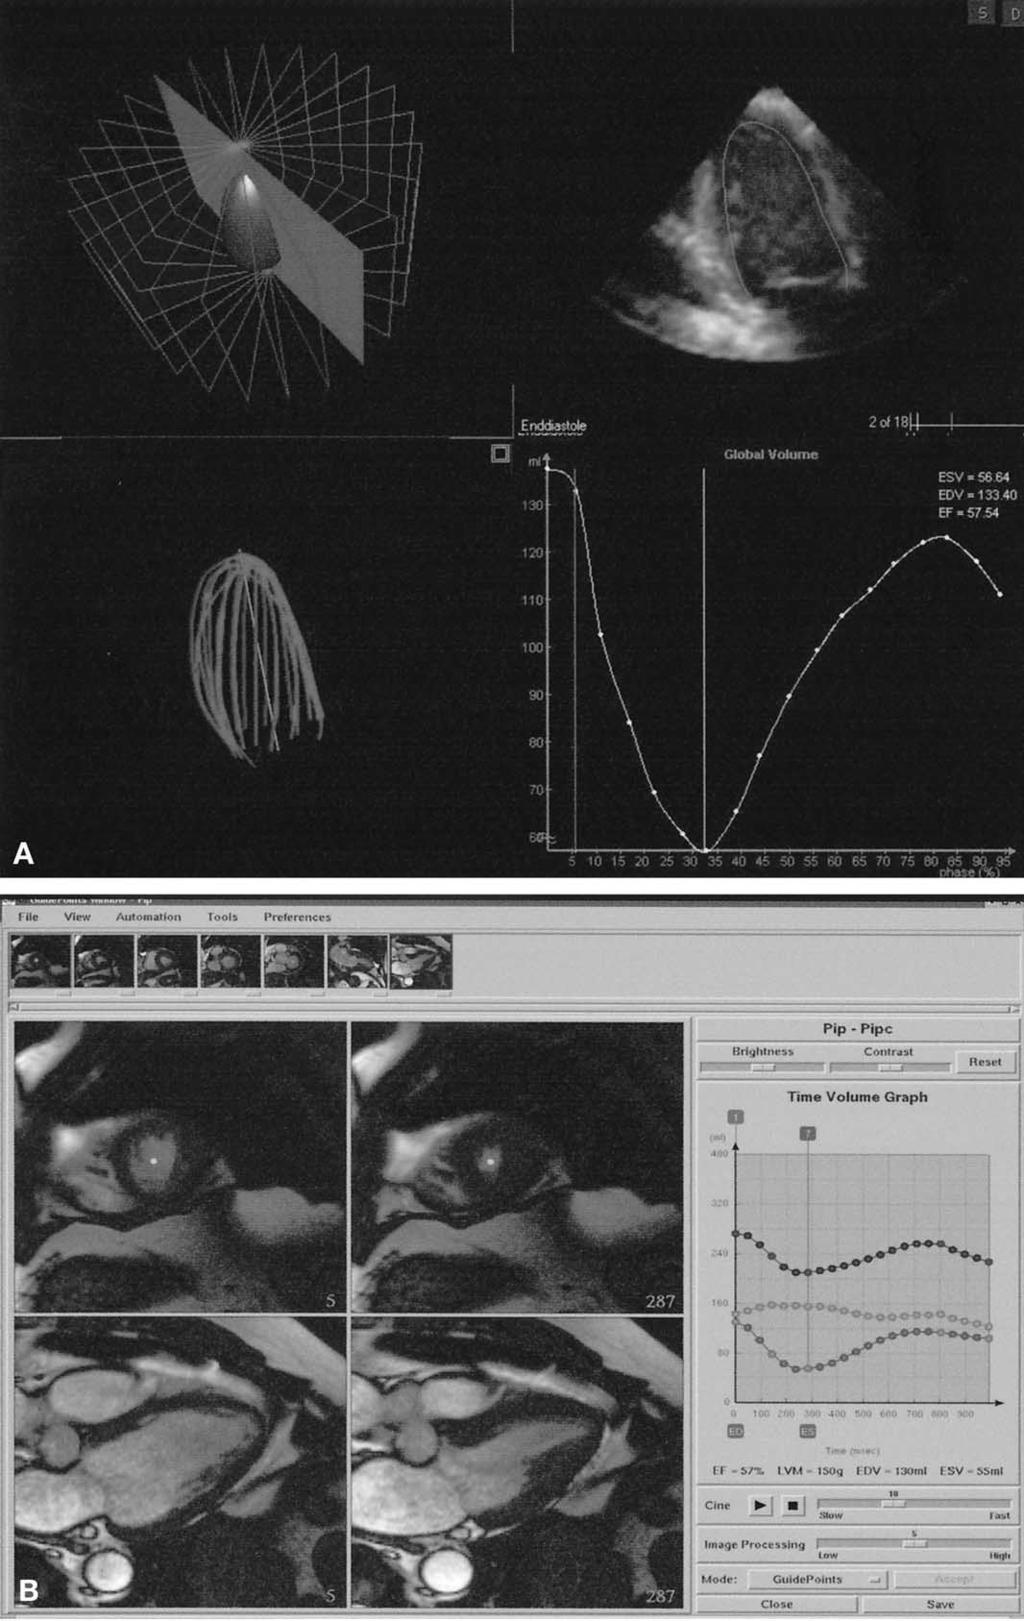 880 Jenkins et al. JACC Vol. 44, No. 4, 2004 Reproducibility and Accuracy of 3DE August 18, 2004:878 86 Figure 1. (A) Analysis of left ventricular (LV) volume using three-dimensional echocardiography.